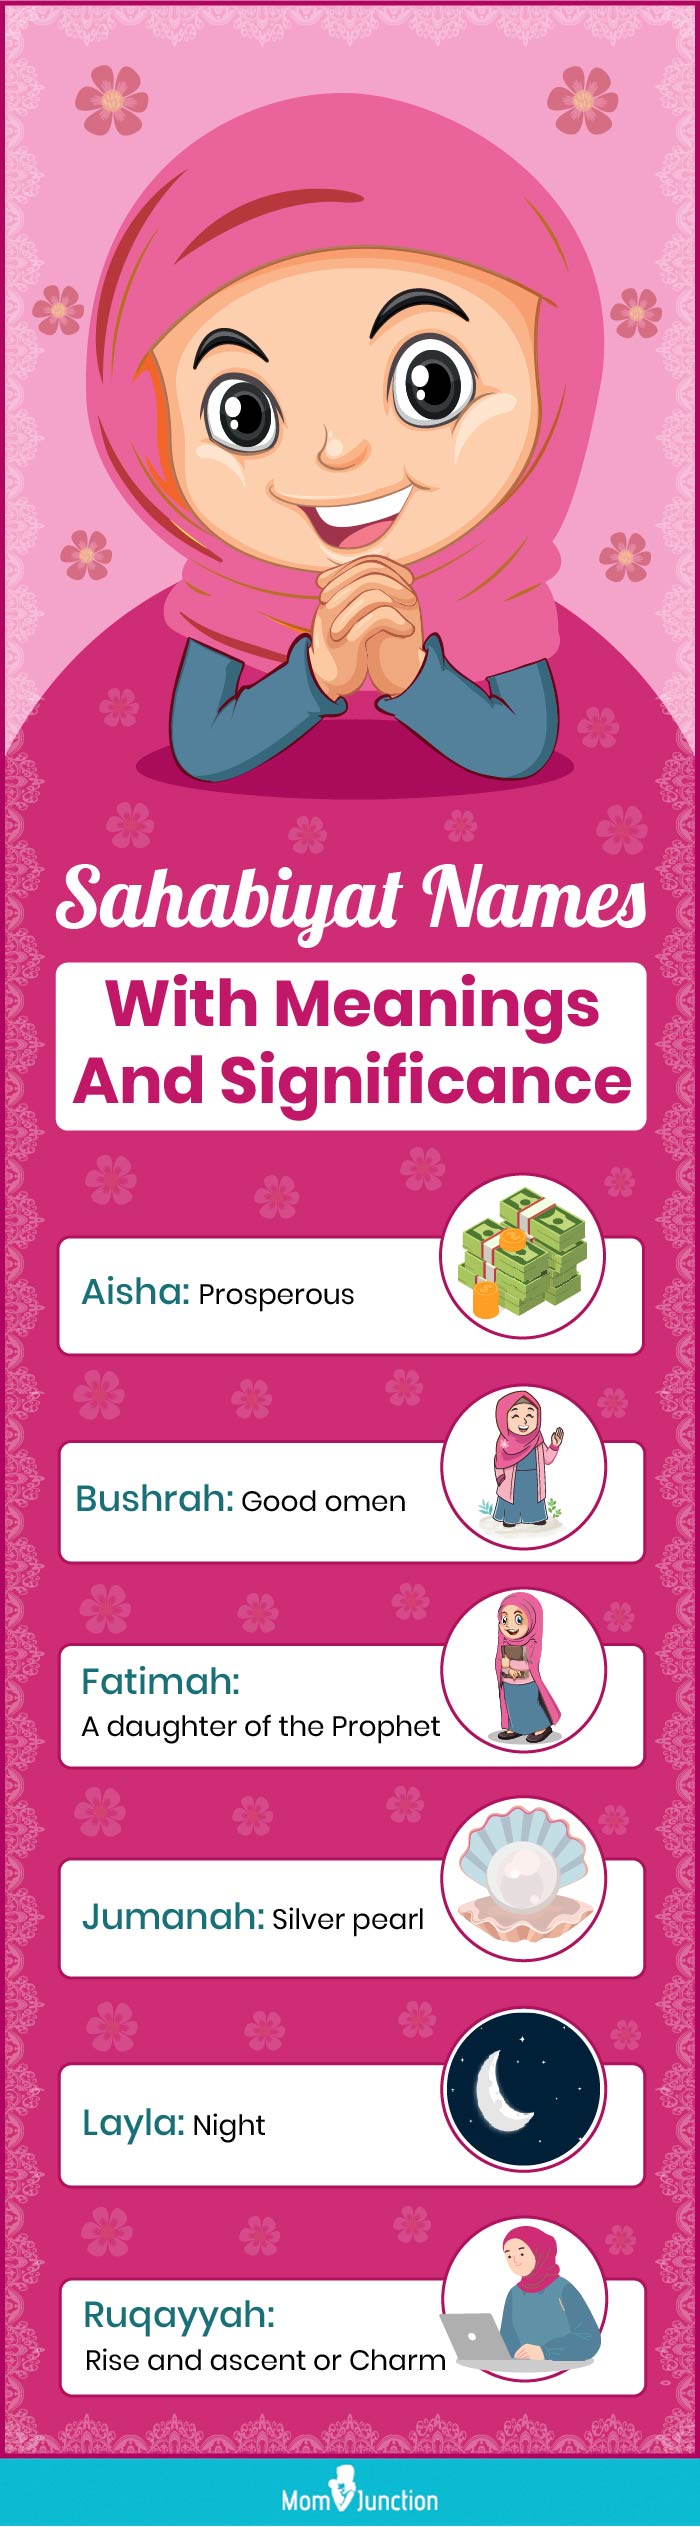 sahabiyat names with meanings and significanc (infographic)